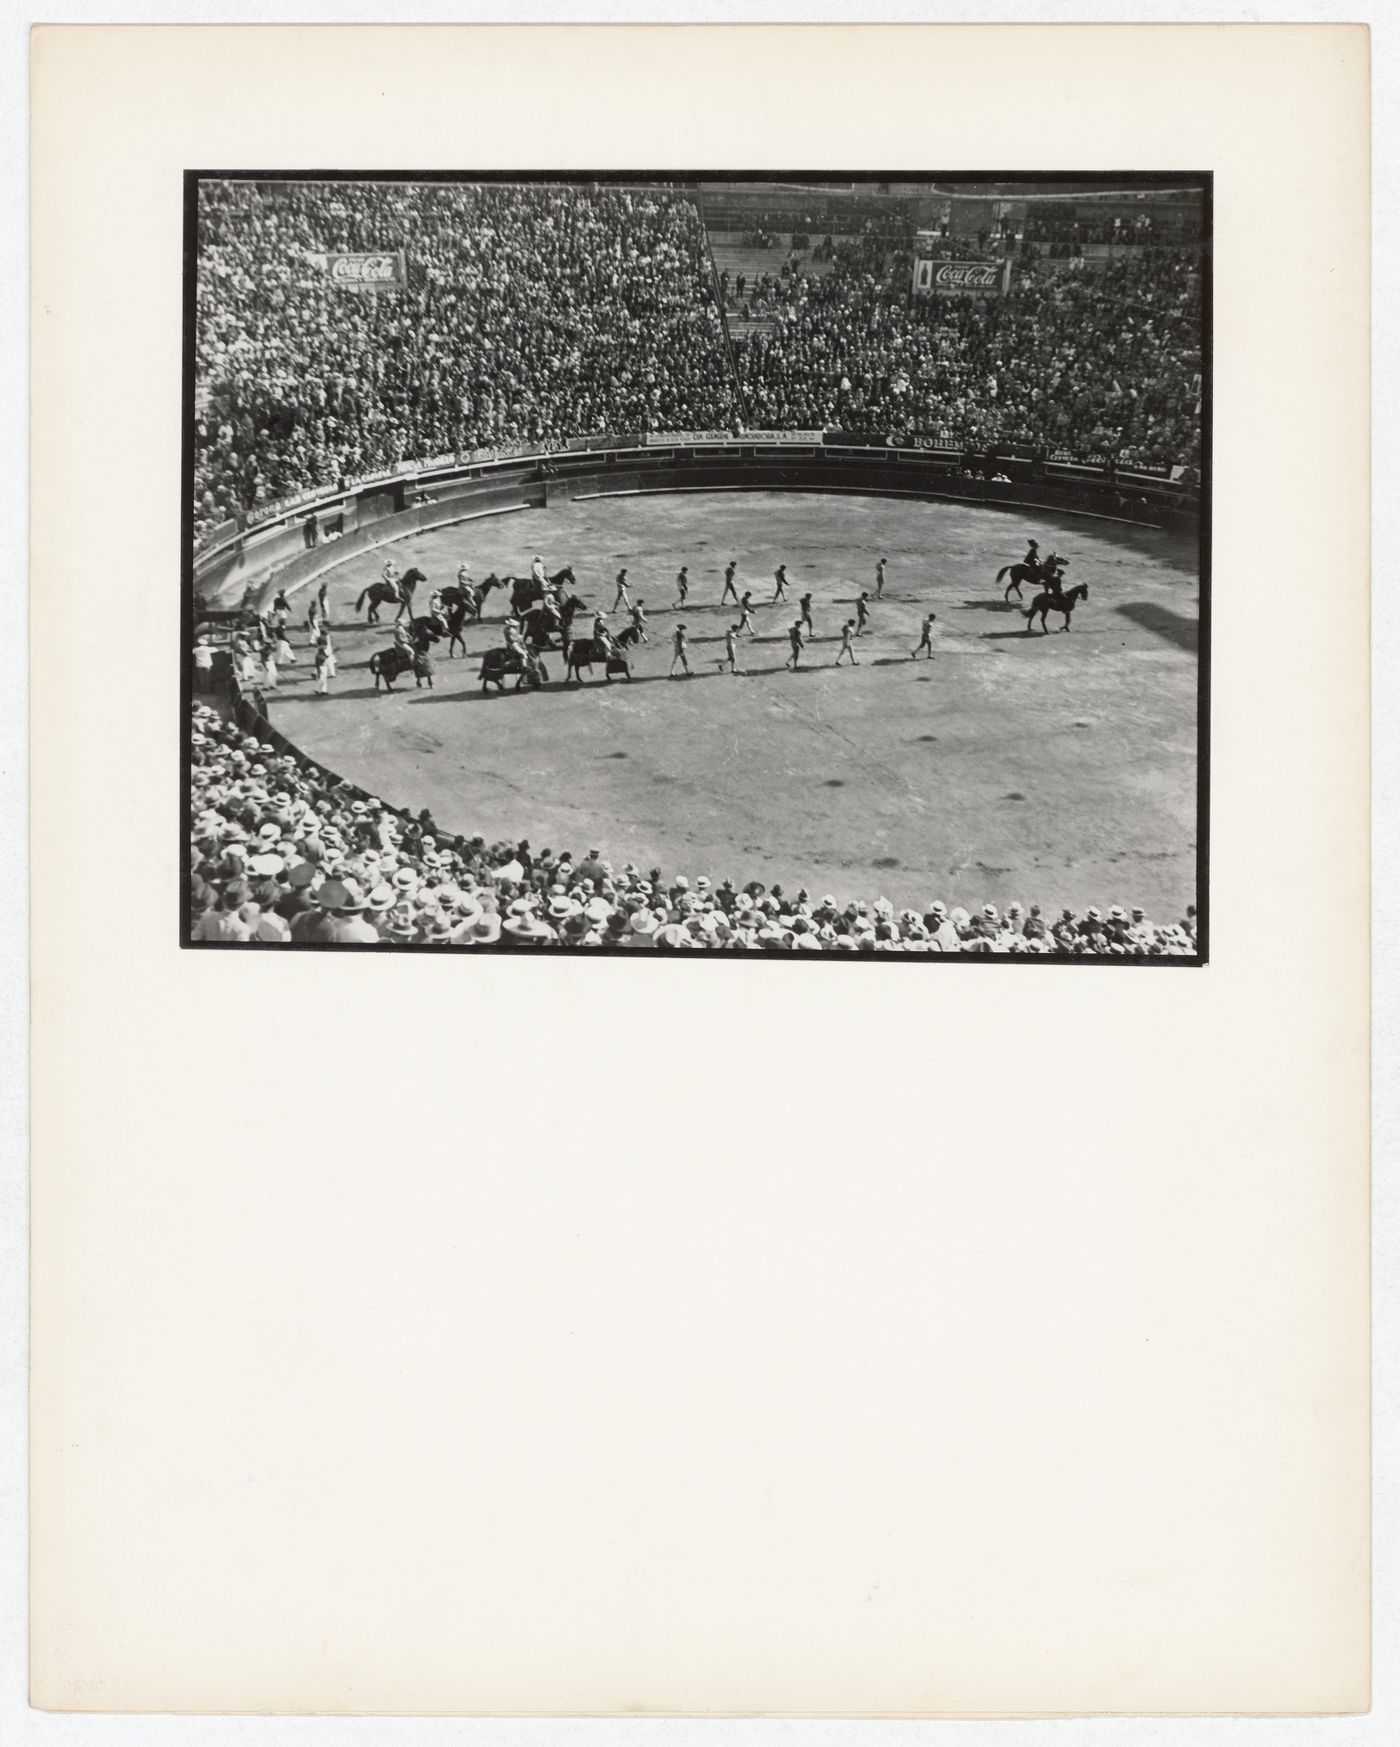 View of a stadium showing the grand entrance of a bullfight, Mexico City, Mexico